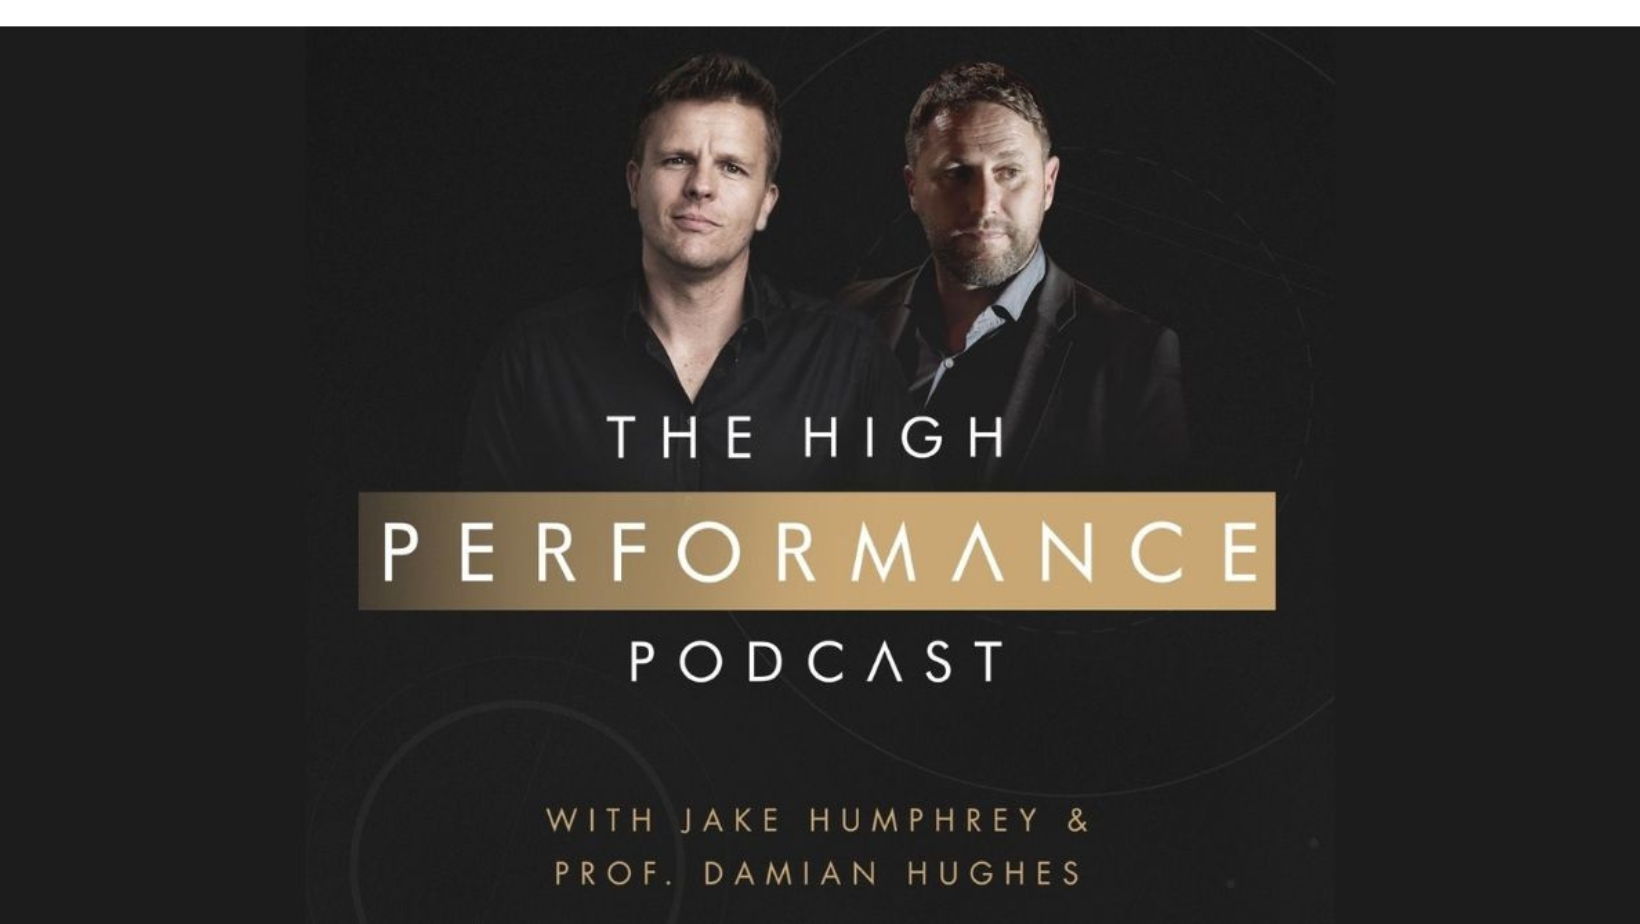 The High Performance Podcast – Listen Here